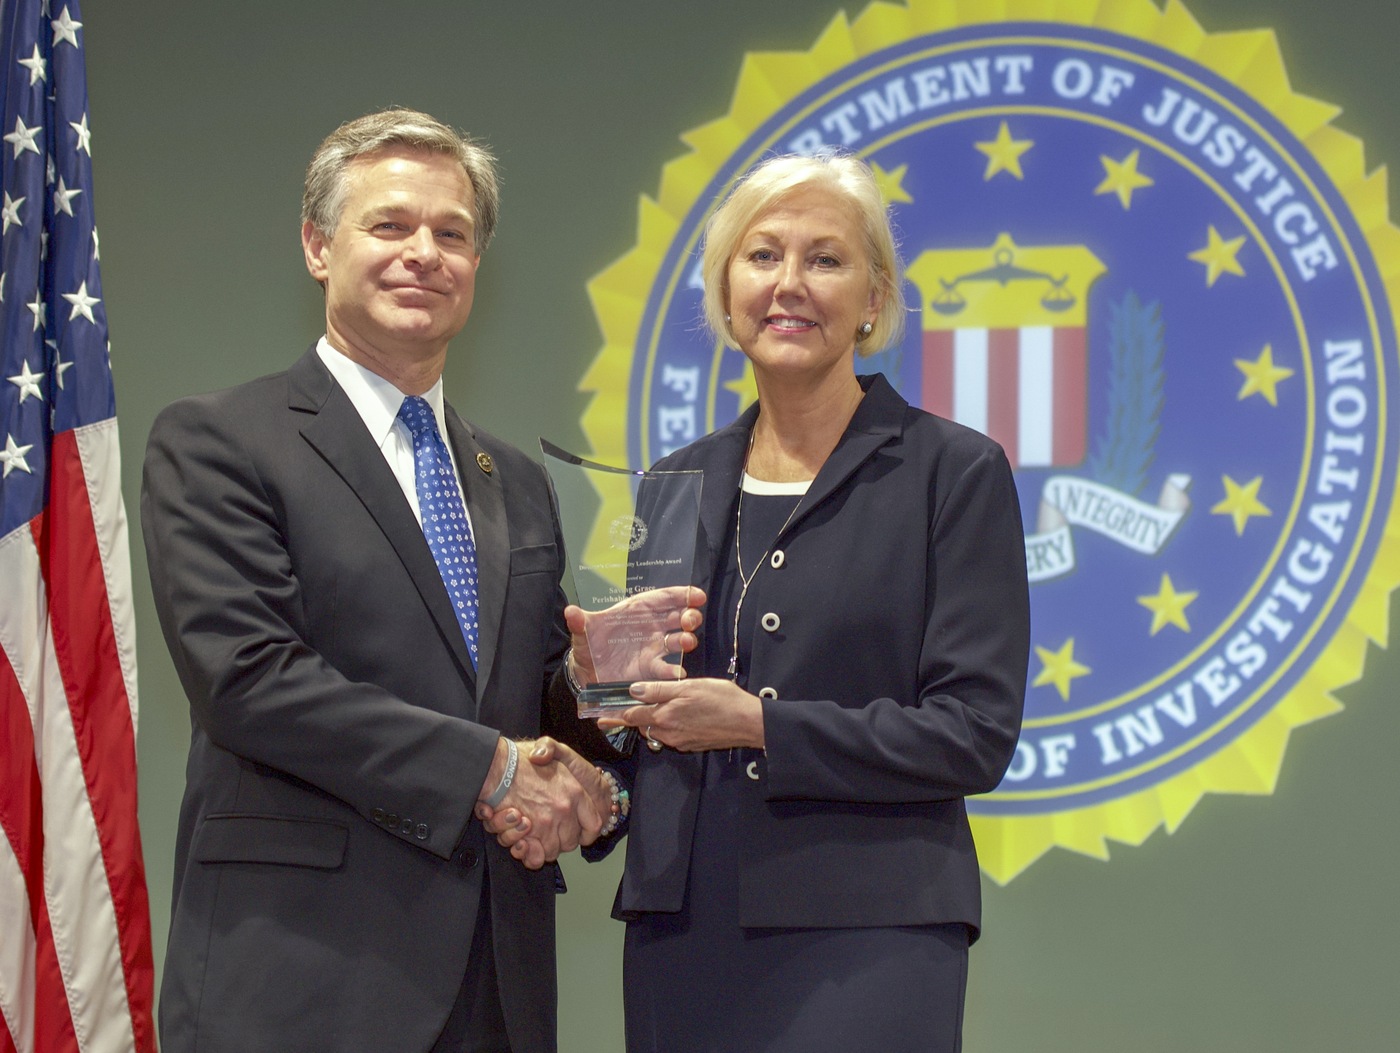 FBI Director Christopher Wray presents Omaha Division recipient Saving Grace Perishable Food Rescue (represented by Beth Ostdiek Smith) with the Director’s Community Leadership Award (DCLA) at a ceremony at FBI Headquarters on May 3, 2019.